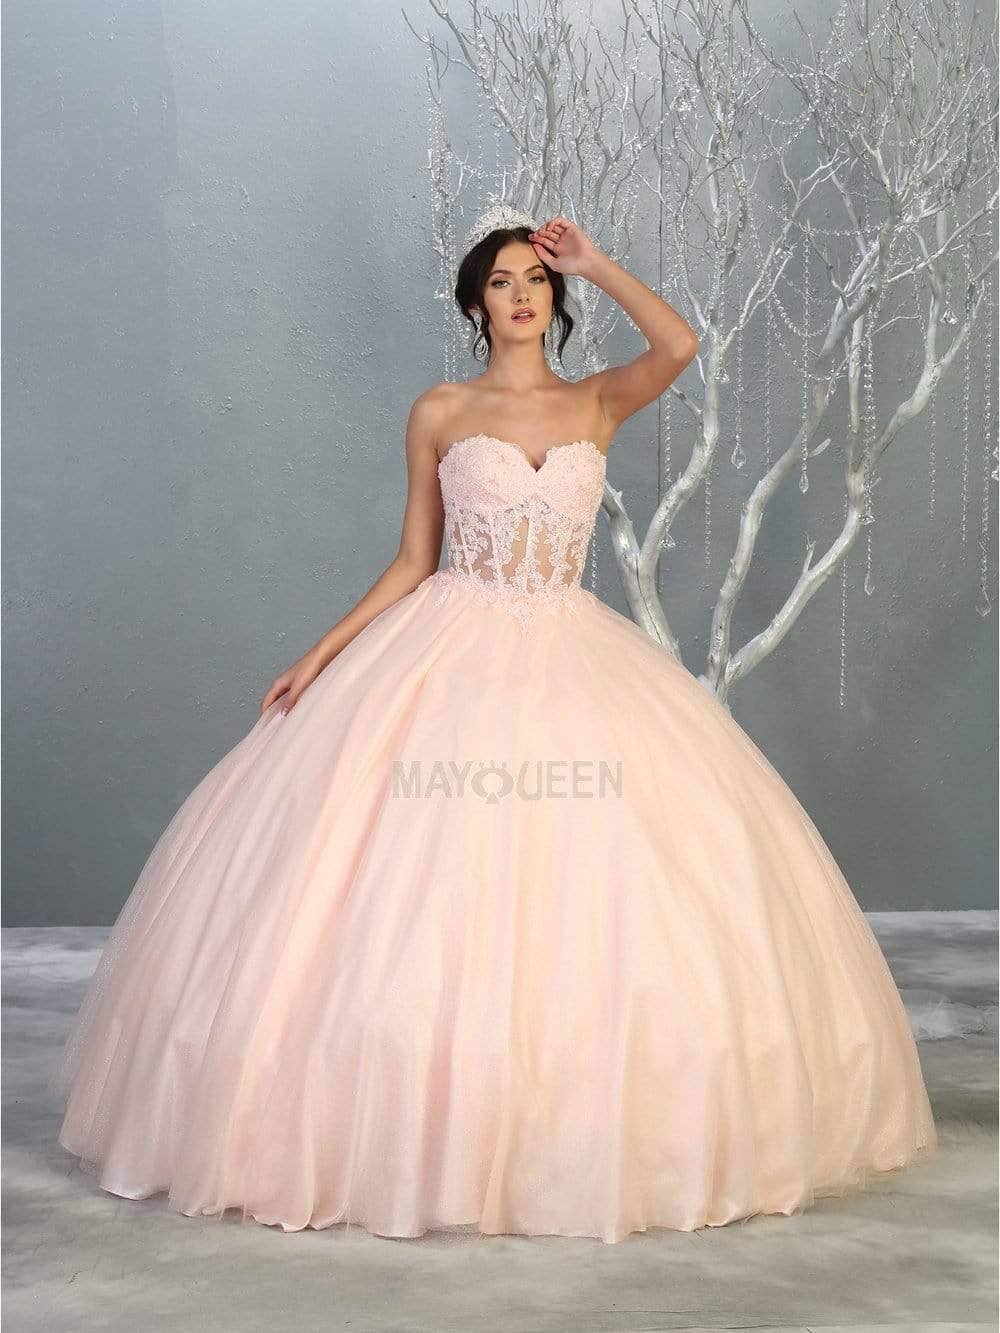 Image of May Queen - LK141 Strapless Sweetheart Corset Bodice Ballgown